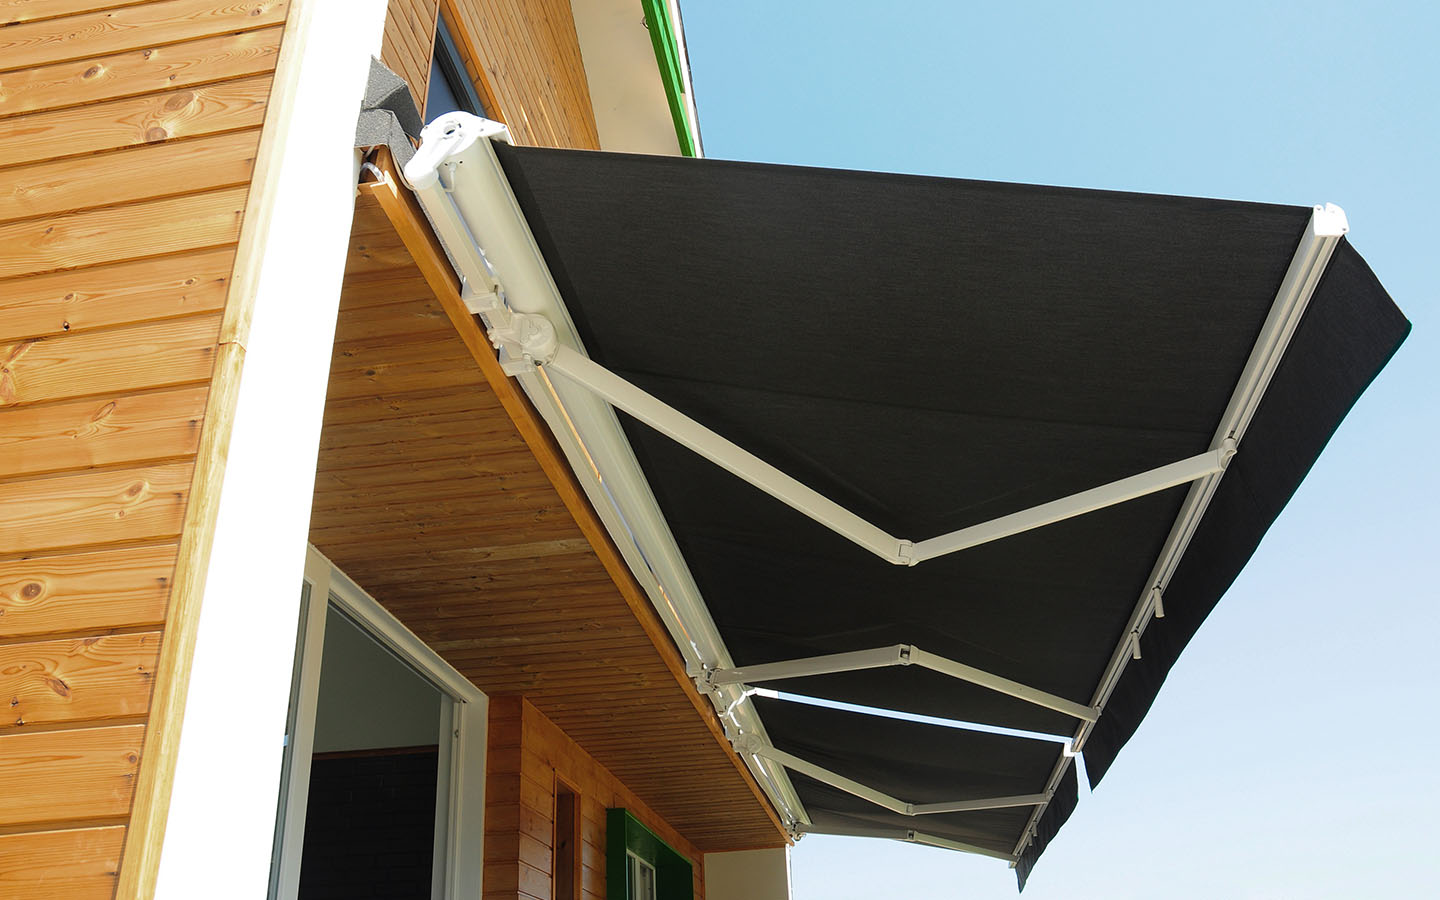 adding sunshades is one of the ways to keep the roof cool in summer